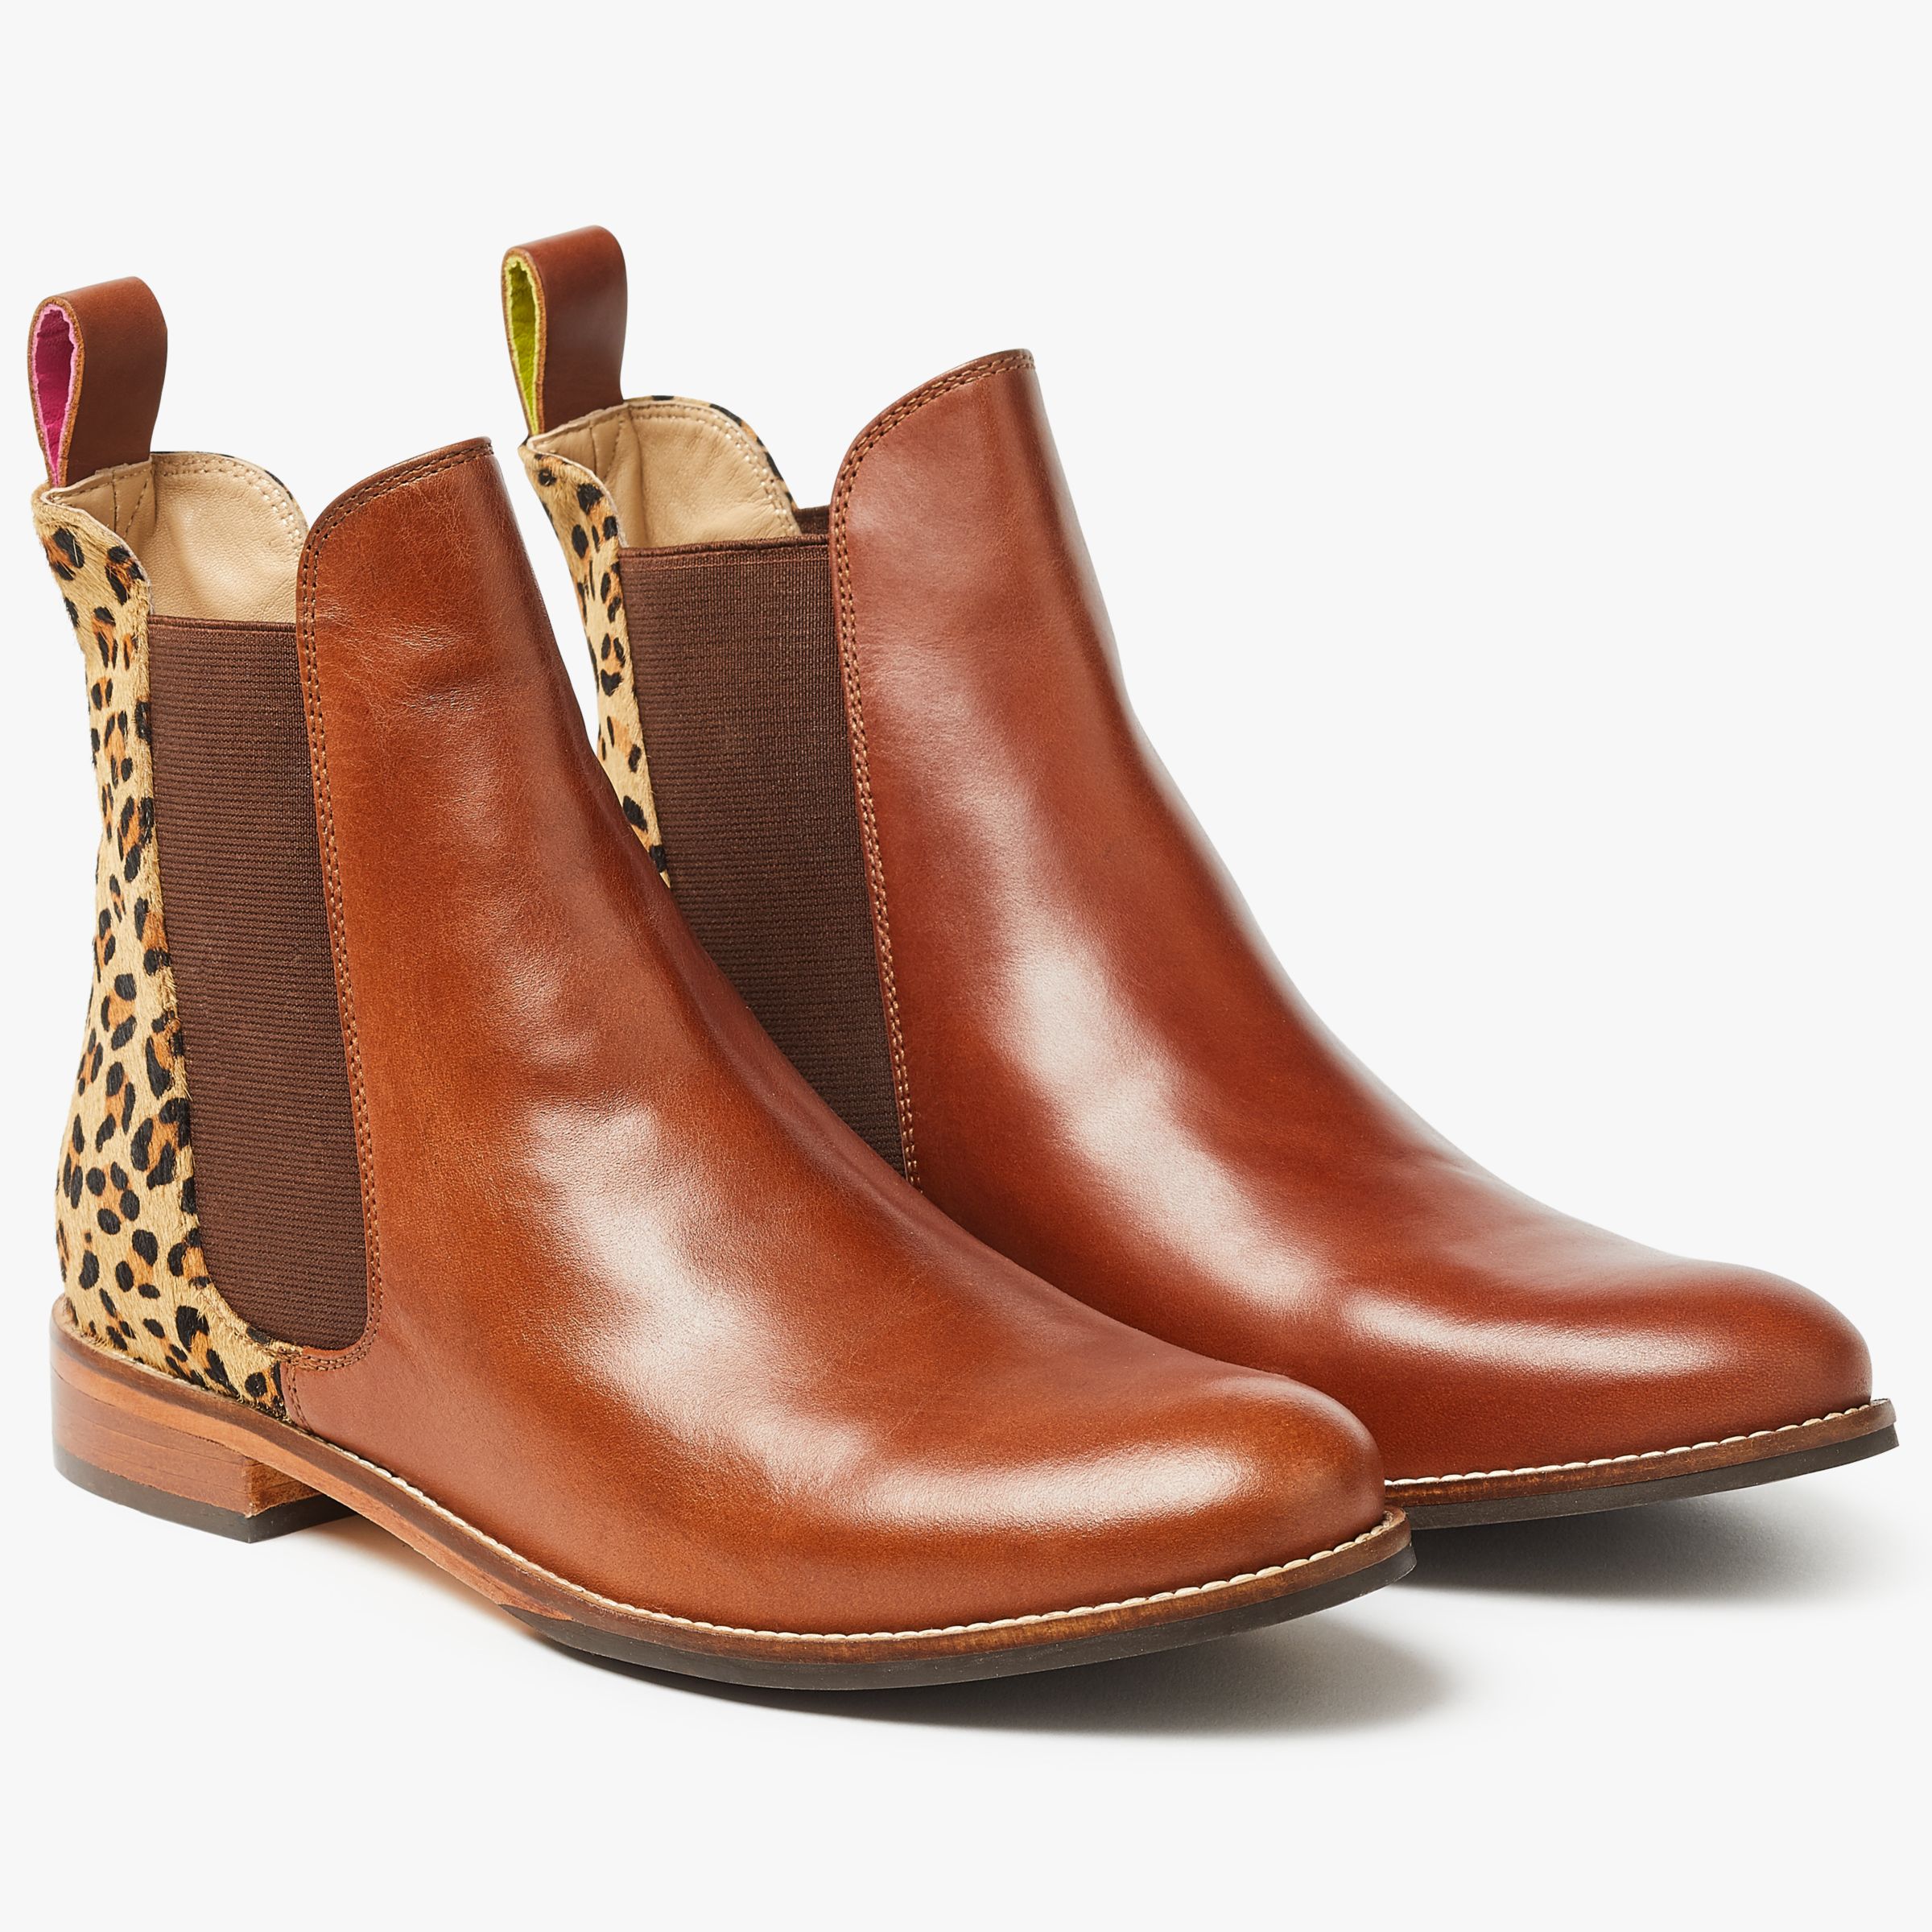 westbourne chelsea boot leopard print